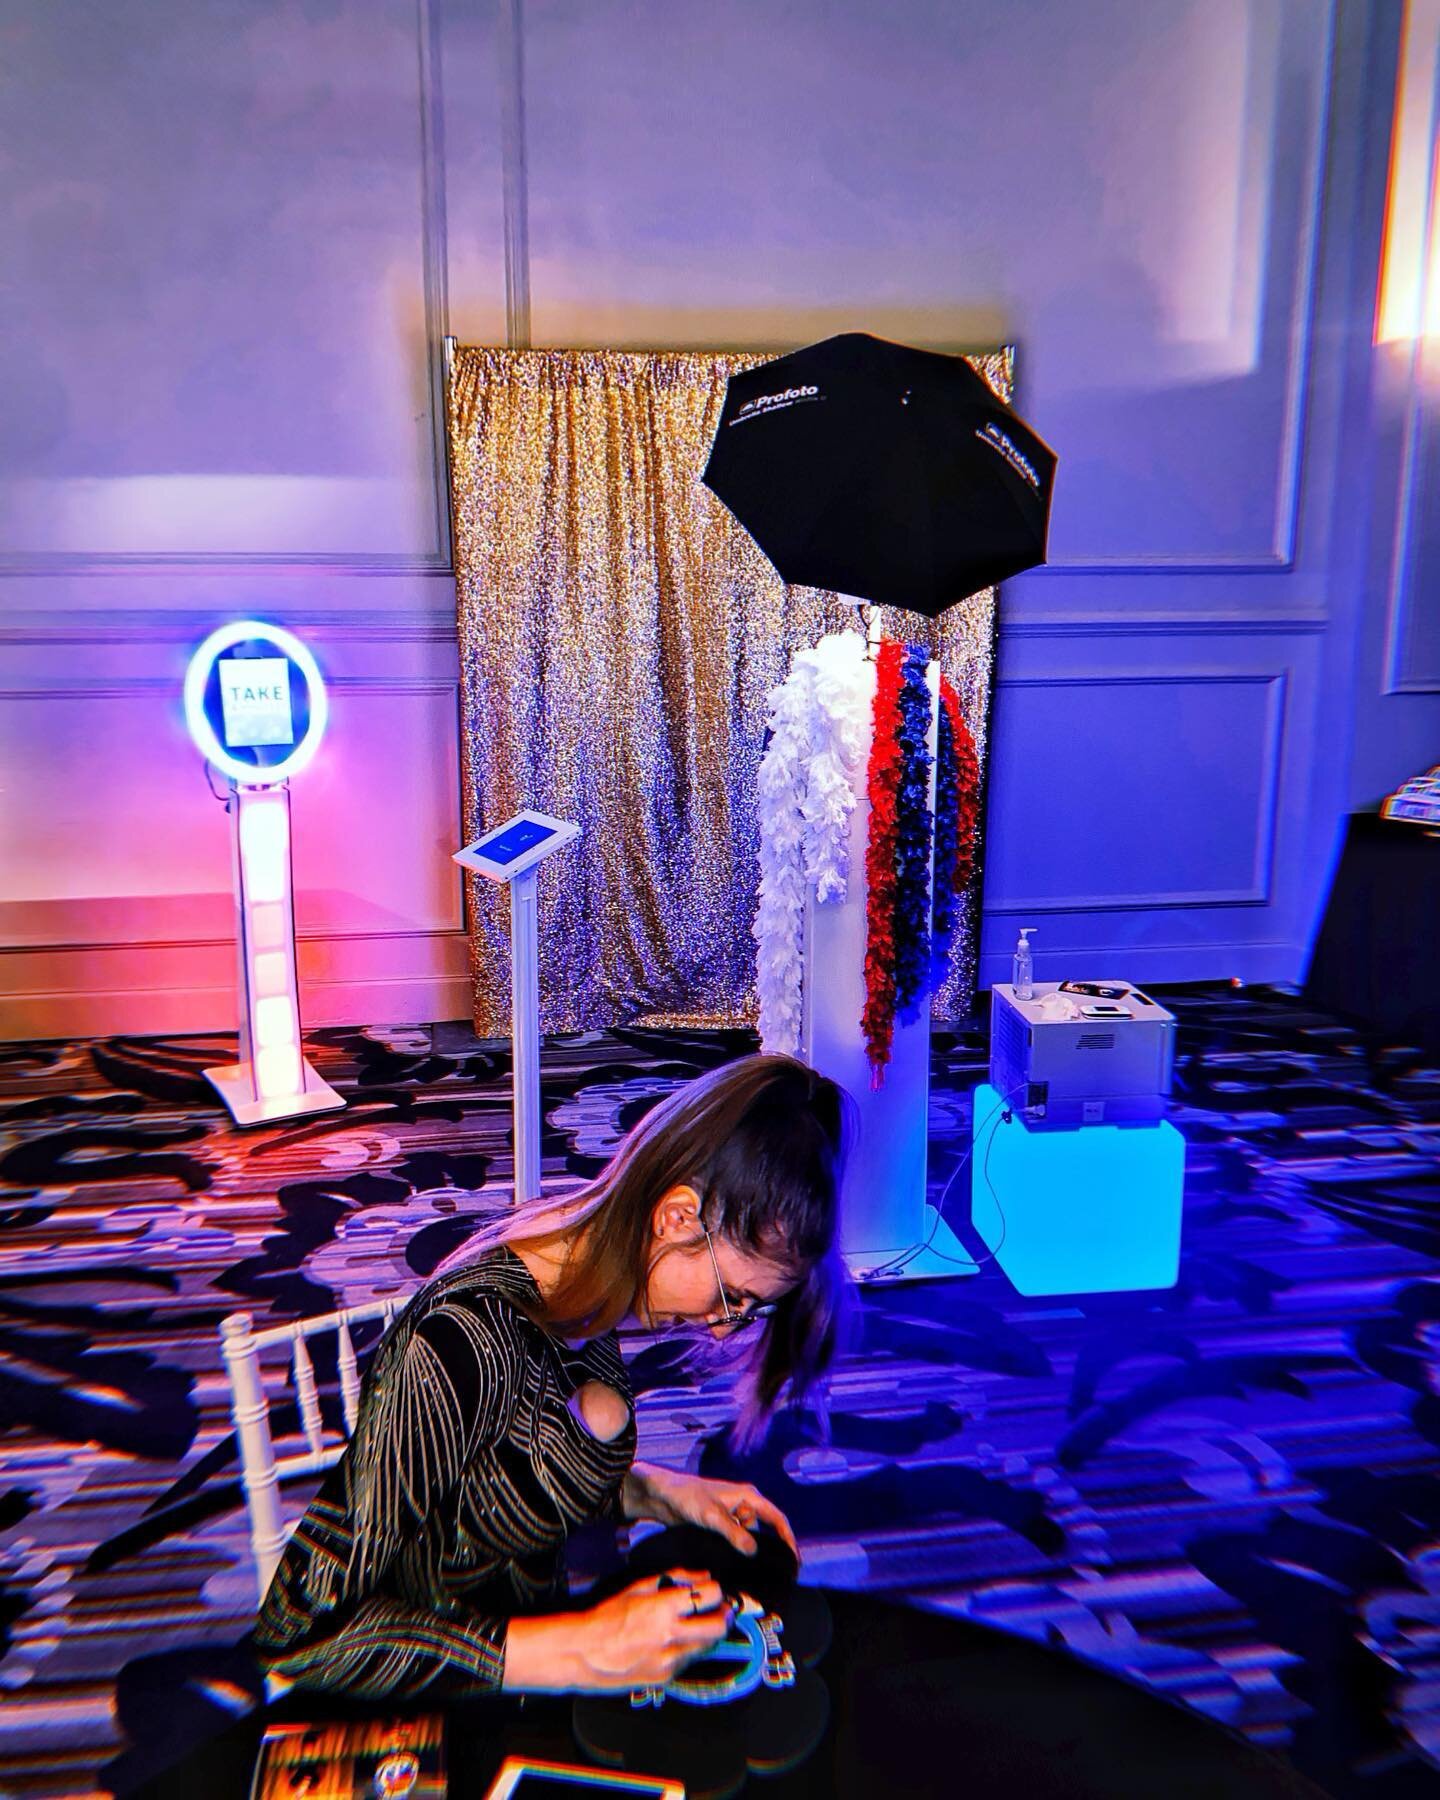 Our wonderful Old City Photo Booth artist! Emily customizes a speech bubble for every event!  #philadelphiaphotobooth #photobooth #instagood #instadaily #photoboothfun #oldcityphotobooth #philadelphiaevents #philadelphiaweddings #photooftheday #phill